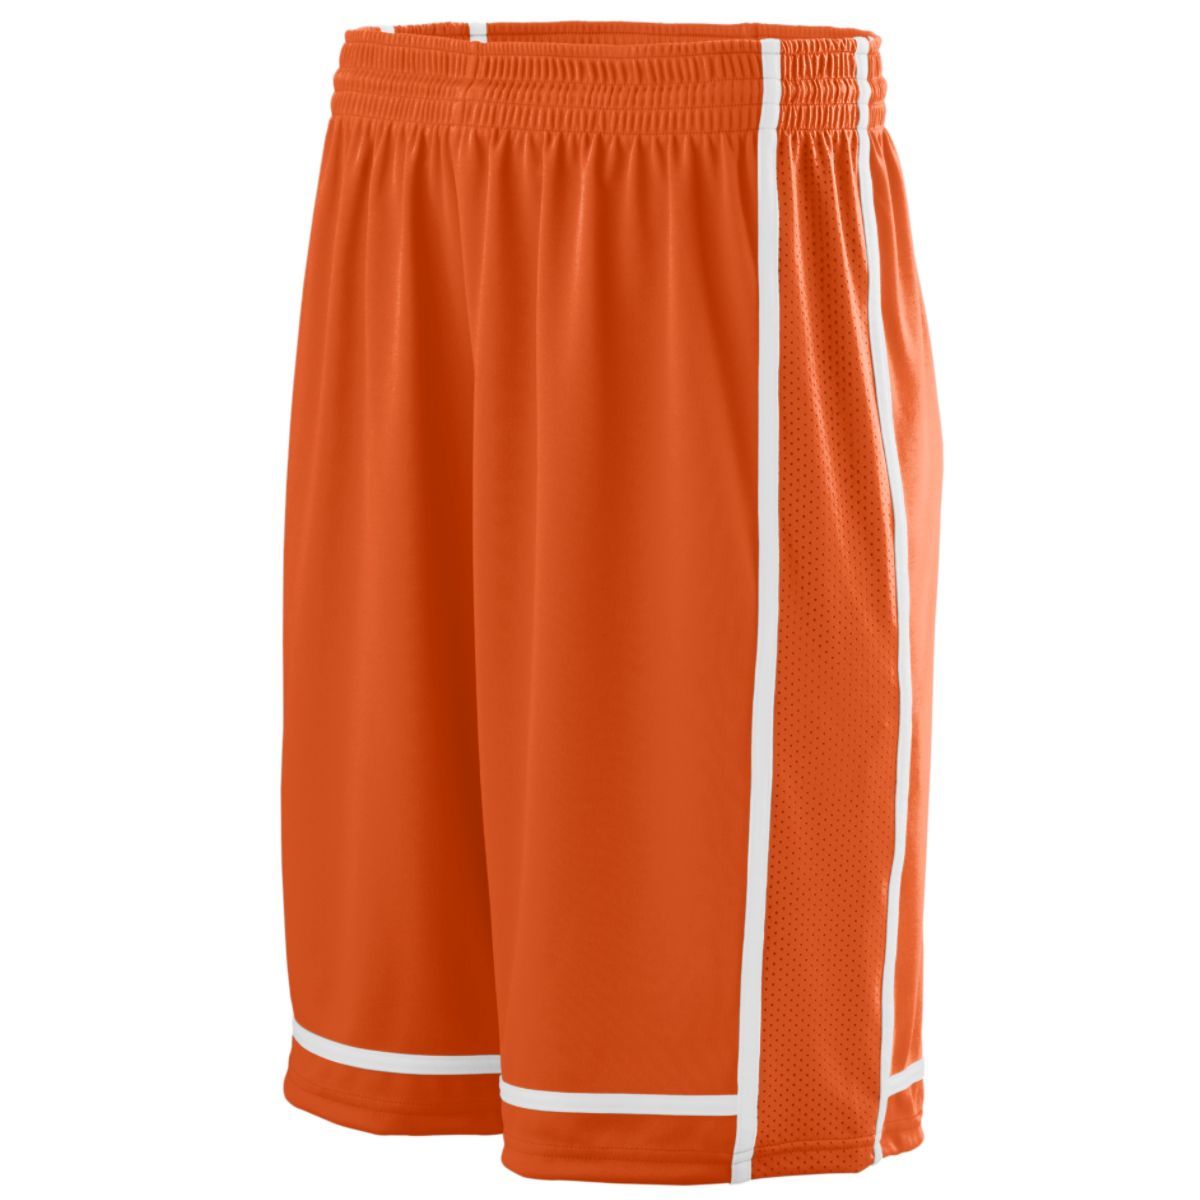 Augusta Sportswear Winning Streak Shorts in Orange/White  -Part of the Adult, Adult-Shorts, Augusta-Products, Basketball, All-Sports, All-Sports-1 product lines at KanaleyCreations.com